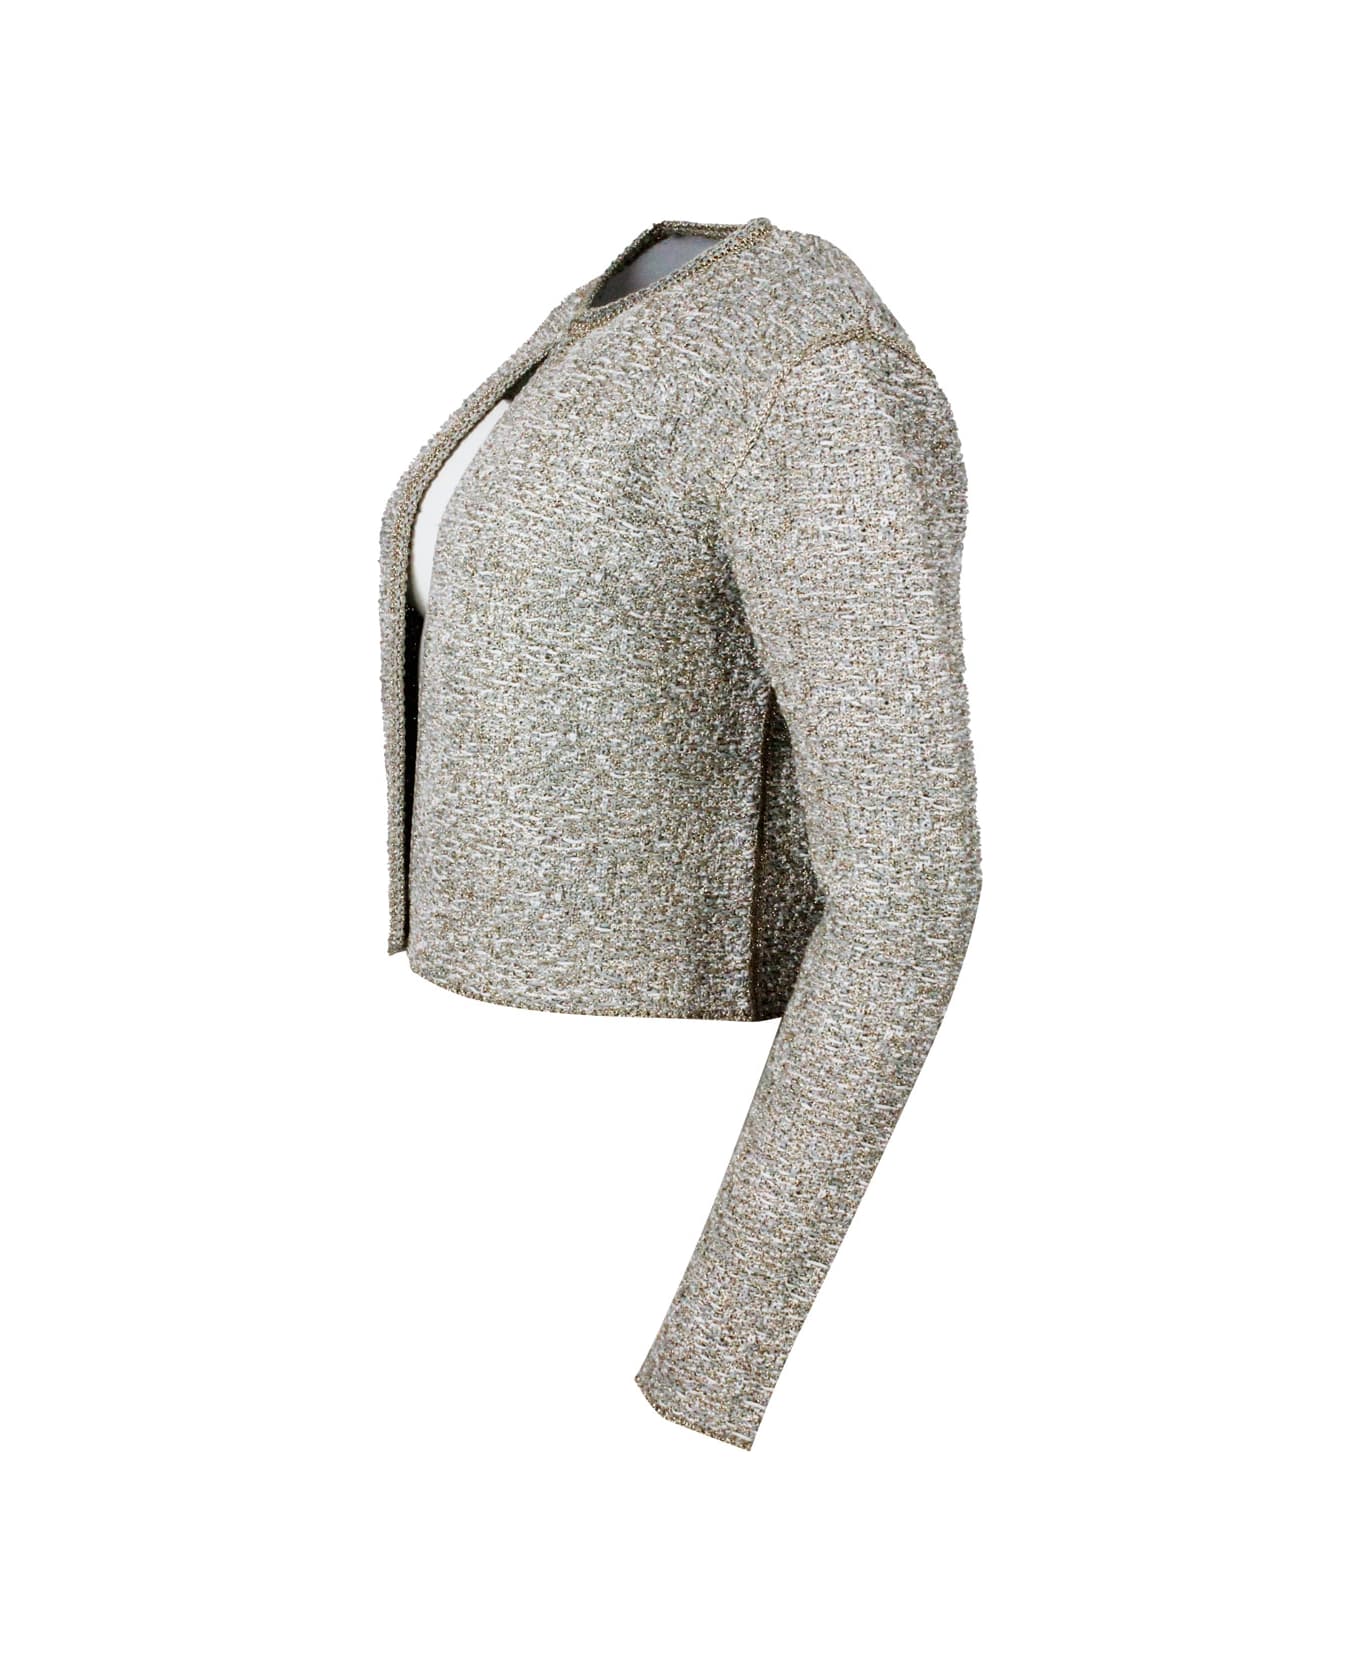 Fabiana Filippi Chanel-style Jacket Sweater Open On The Front And With Hook Closure Embellished With Bright Lurex Threads - Grigio Chiaro/Bianco/Oro